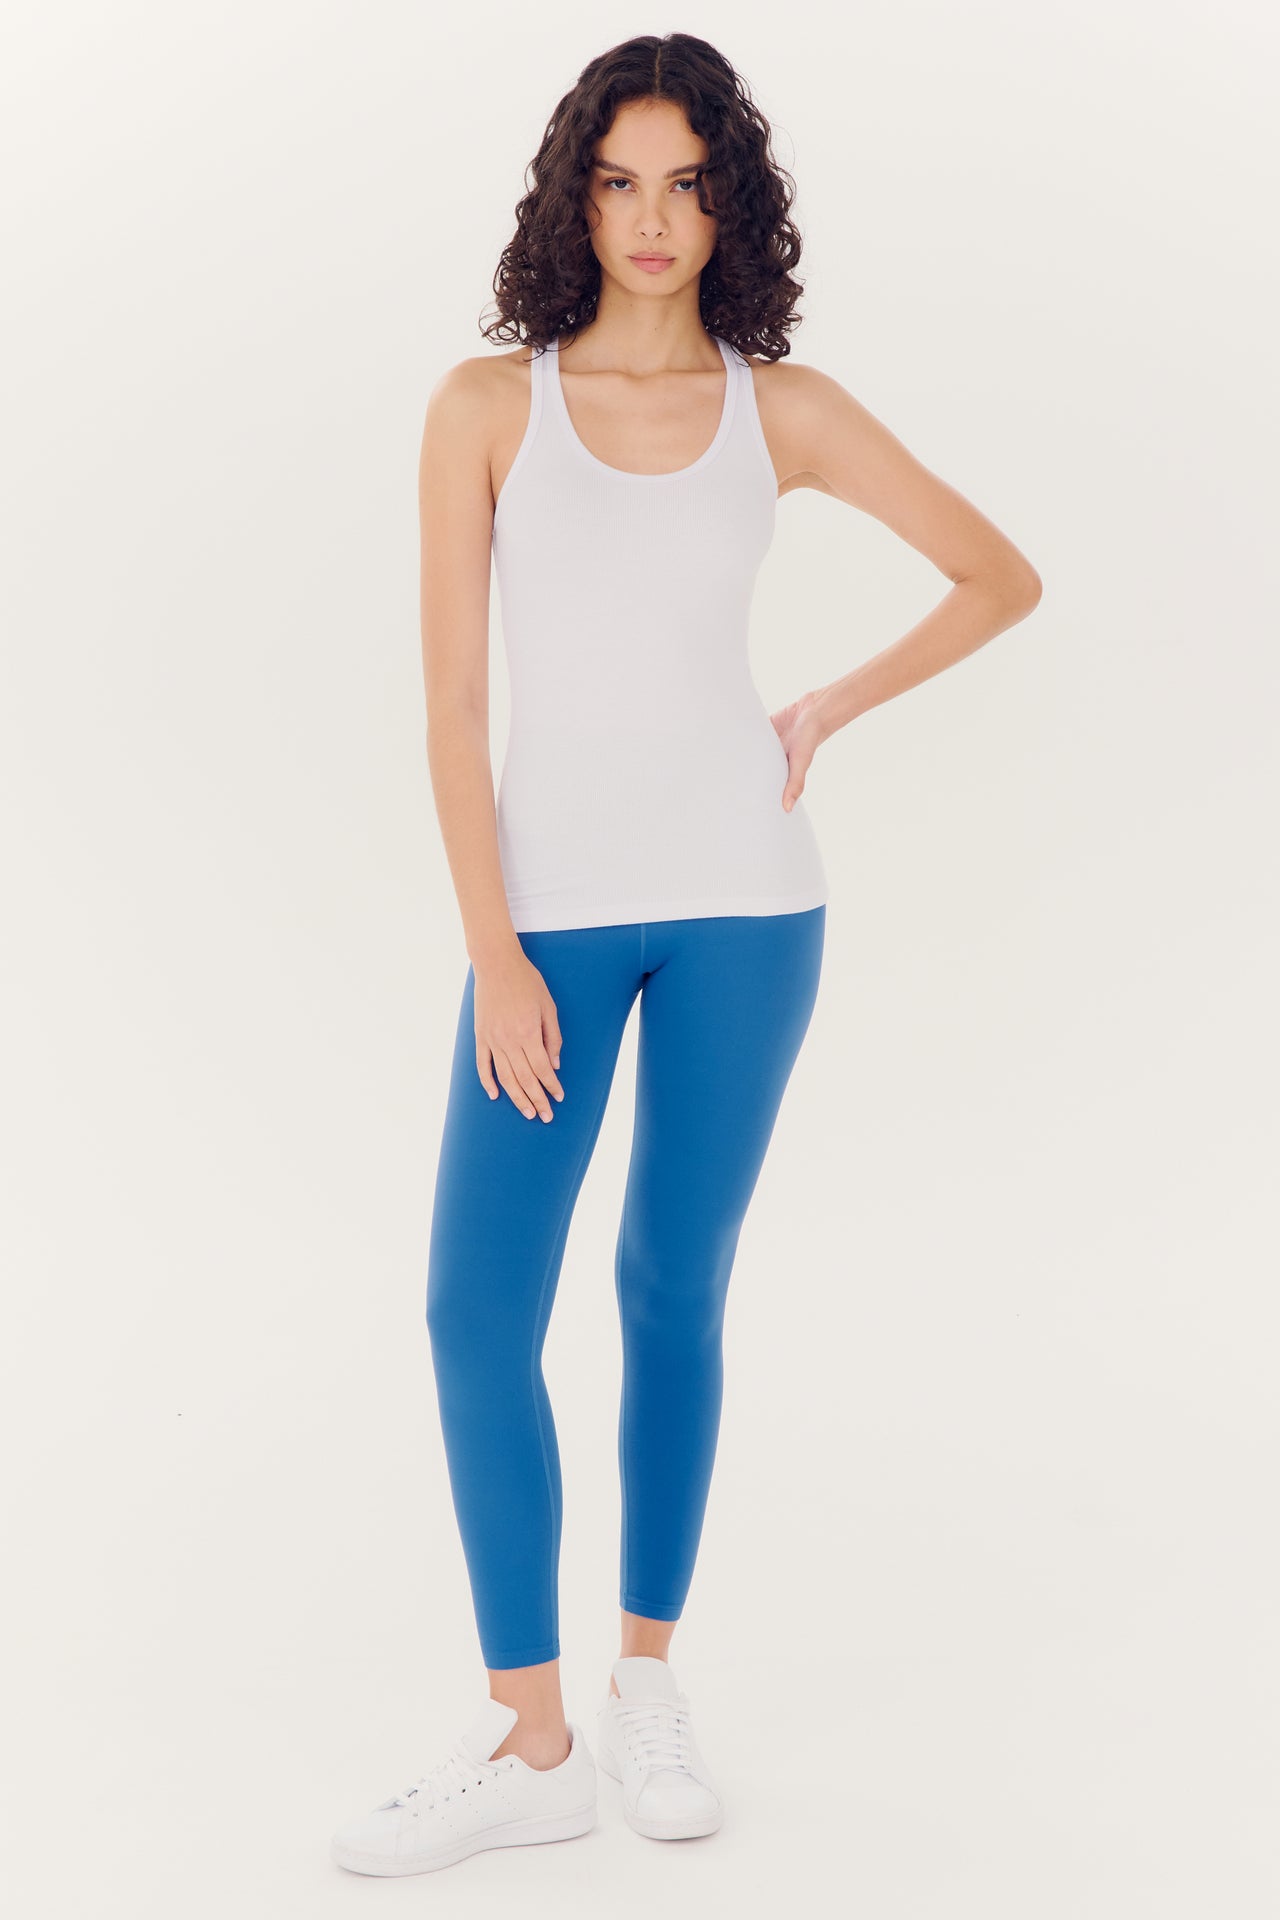 A woman in a Splits59 Ashby Rib Tank - White and blue leggings standing against a white background.